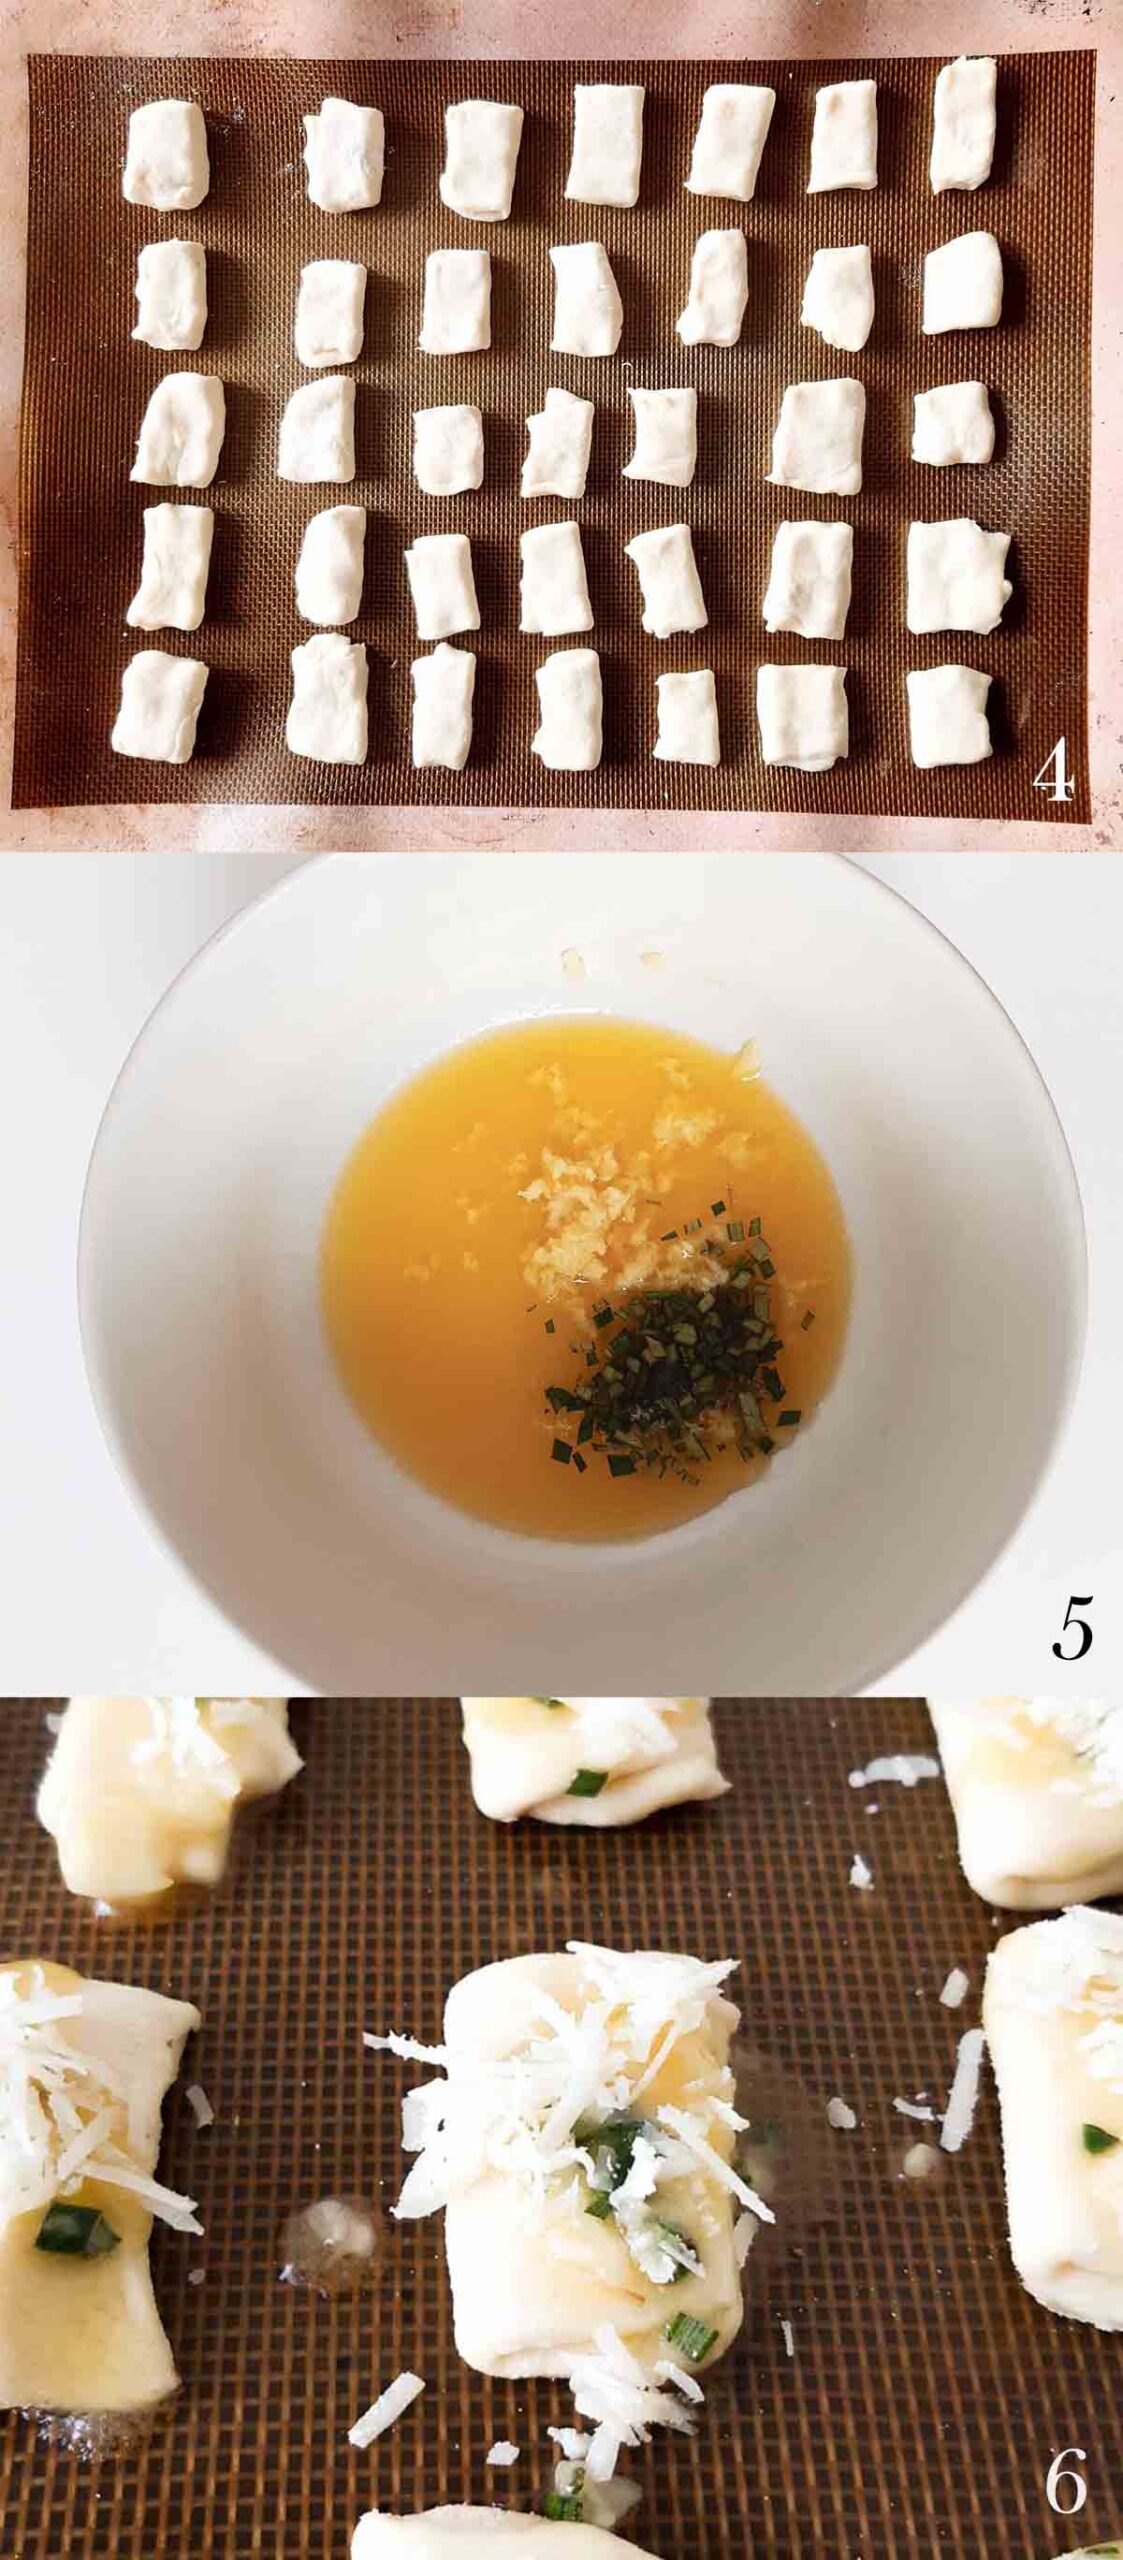 A collage of three photos showing pastry squares on top, then a bowl with melted butter, minced garlic and chopped rosemary. The last photo shows a pastry square topped with the butter and herb mix and sprinkled with grated cheese.